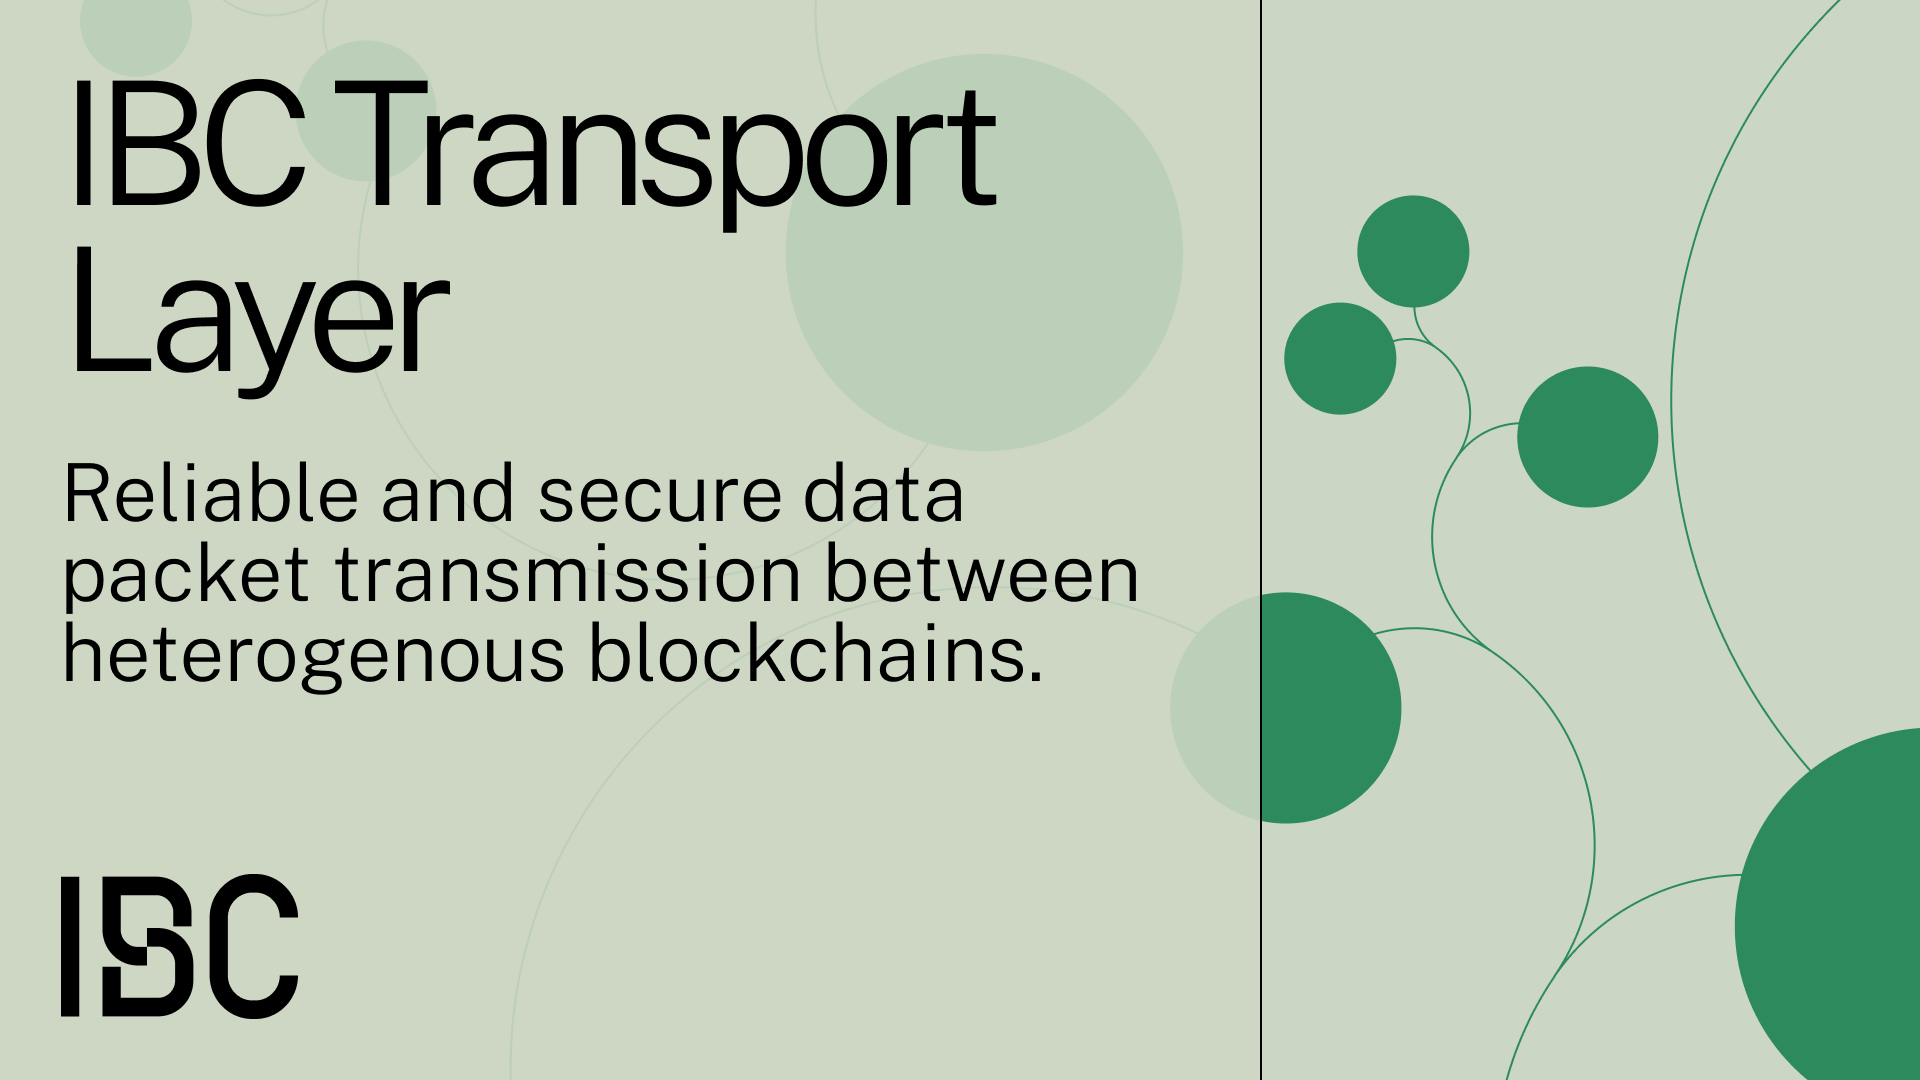 The IBC Transport Layer is responsible for data transport, authentication, and ordering.